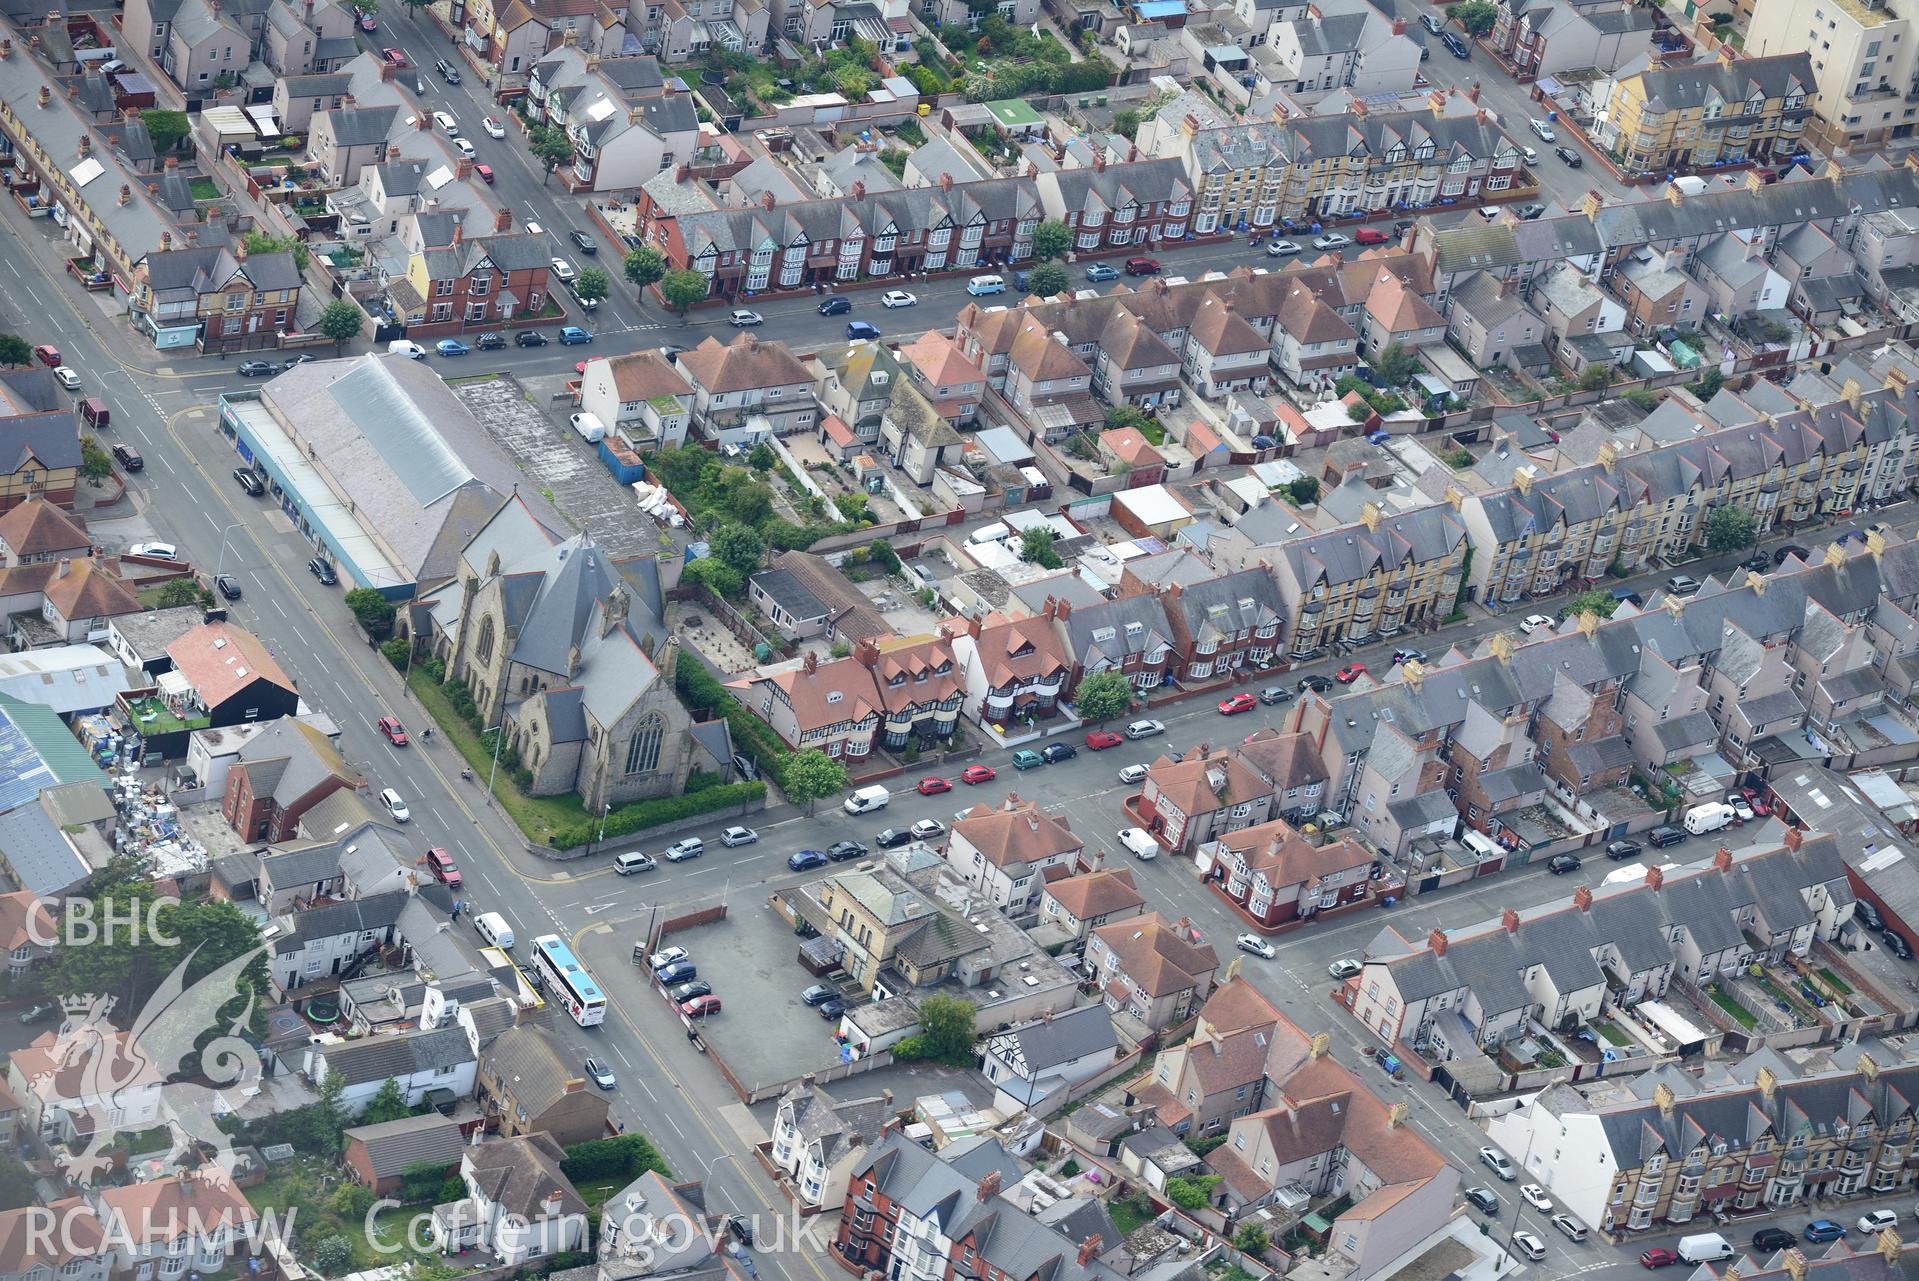 Churchill House, Rhyl. Oblique aerial photograph taken during the Royal Commission's programme of archaeological aerial reconnaissance by Toby Driver on 11th September 2015.